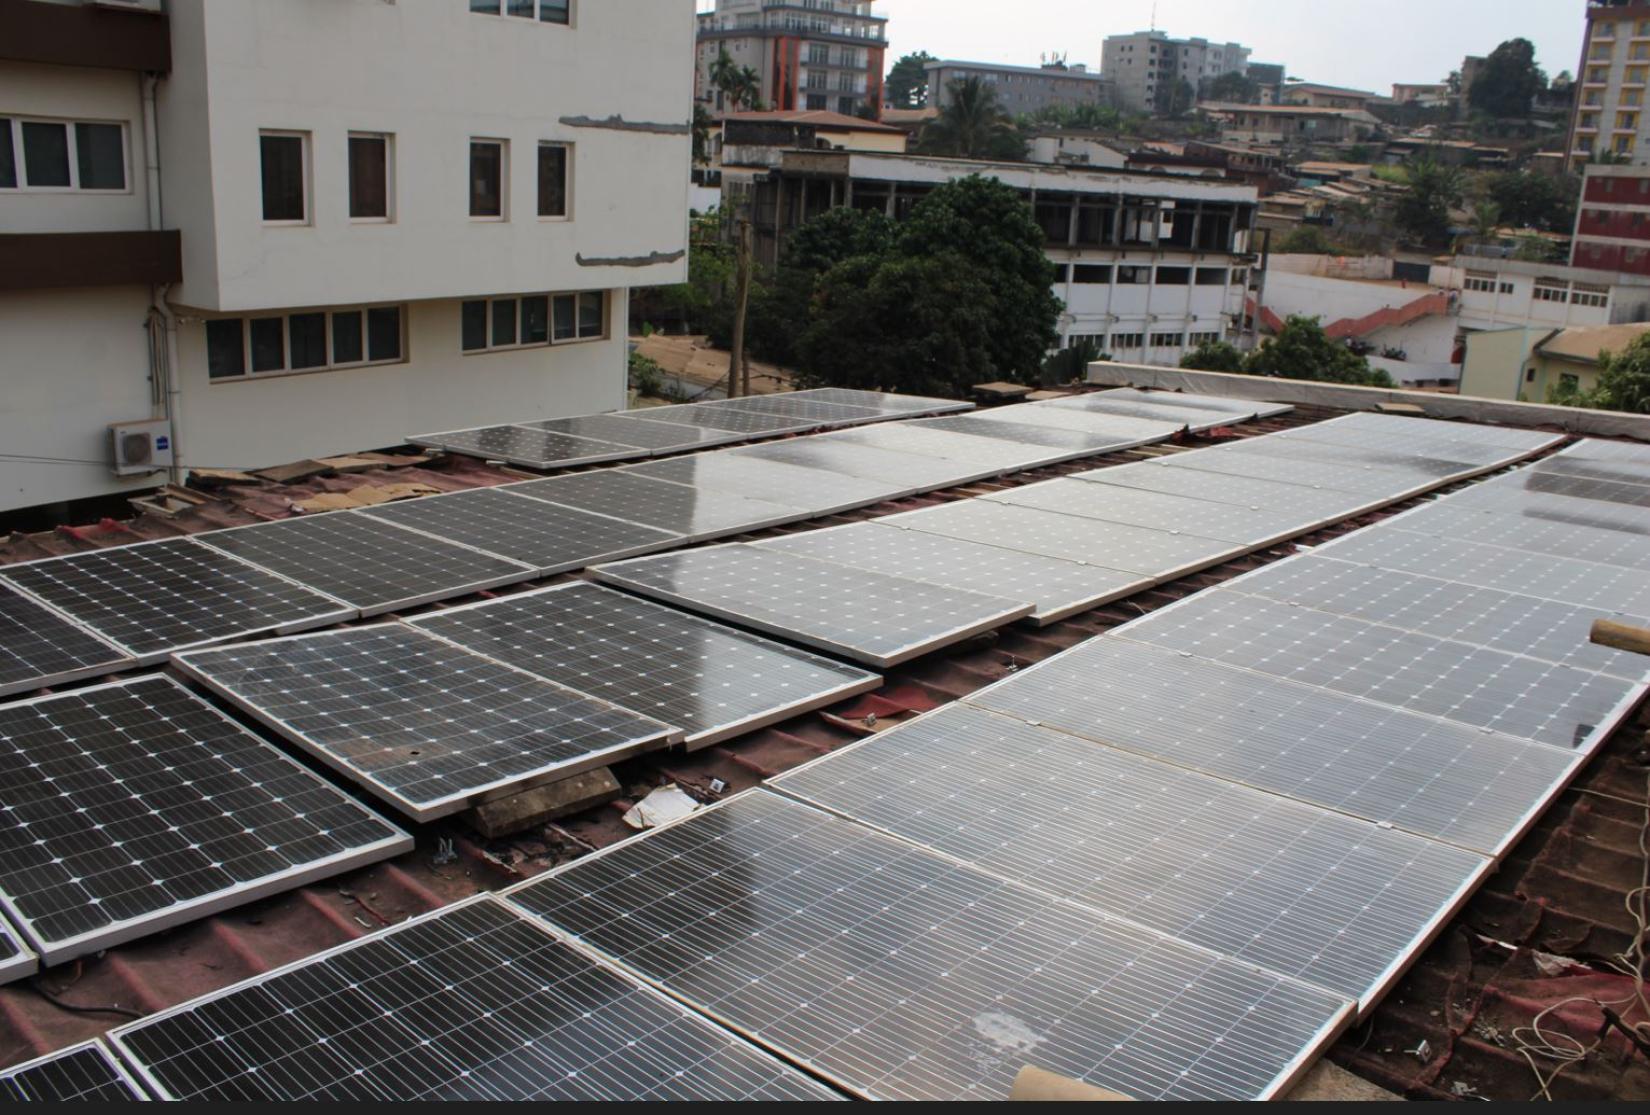 A cross-section of the photovoltaic Solar Panels installed on the roof of the UNDP project building